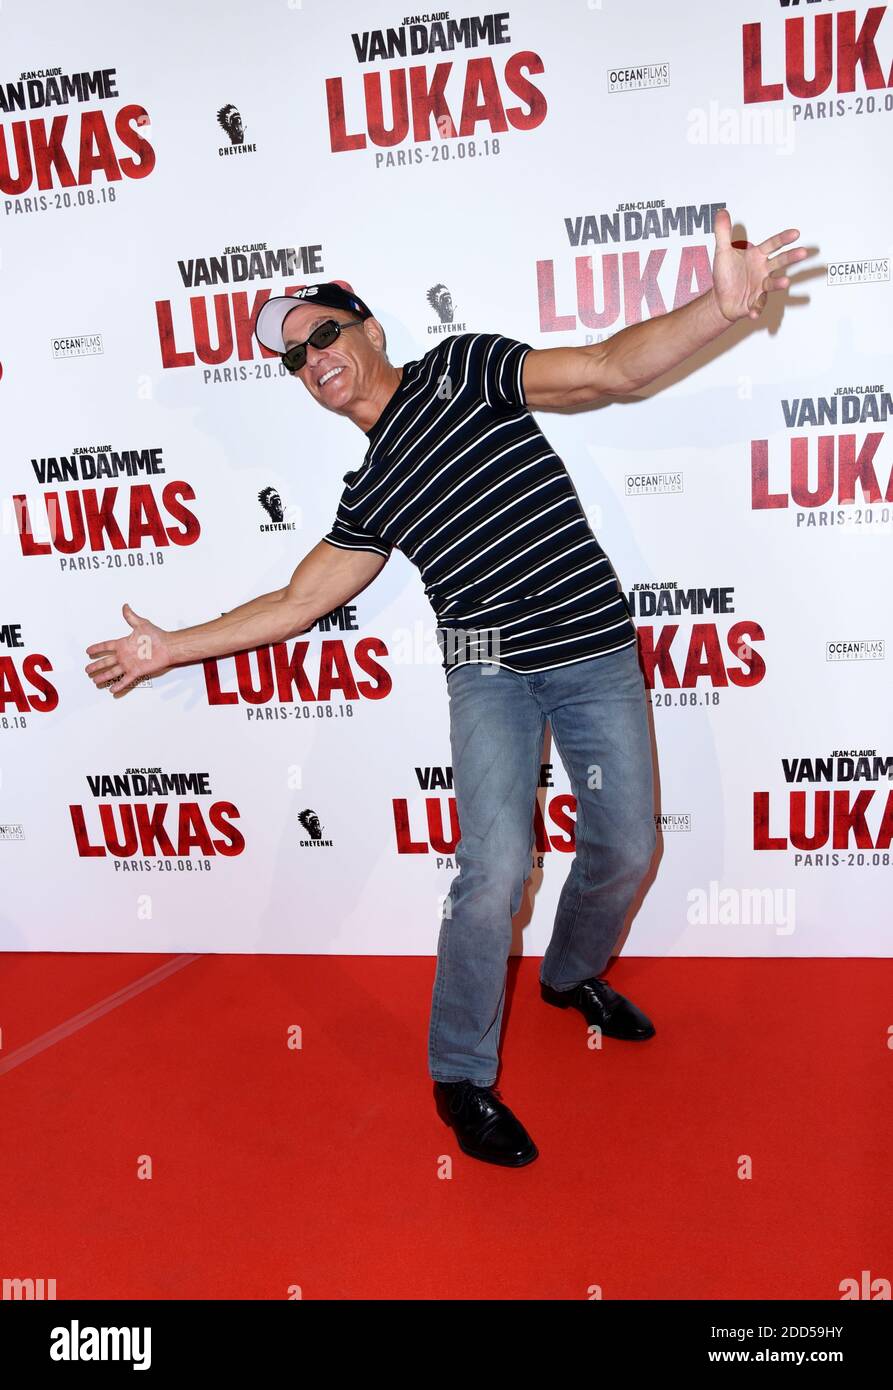 Jean-Claude Van Damme attending Lukas (The Bouncer) Premiere at Opera  Gaumont in Paris, France on August 20, 2018. Photo by Alain  Apaydin/ABACAPRESS.COM Stock Photo - Alamy